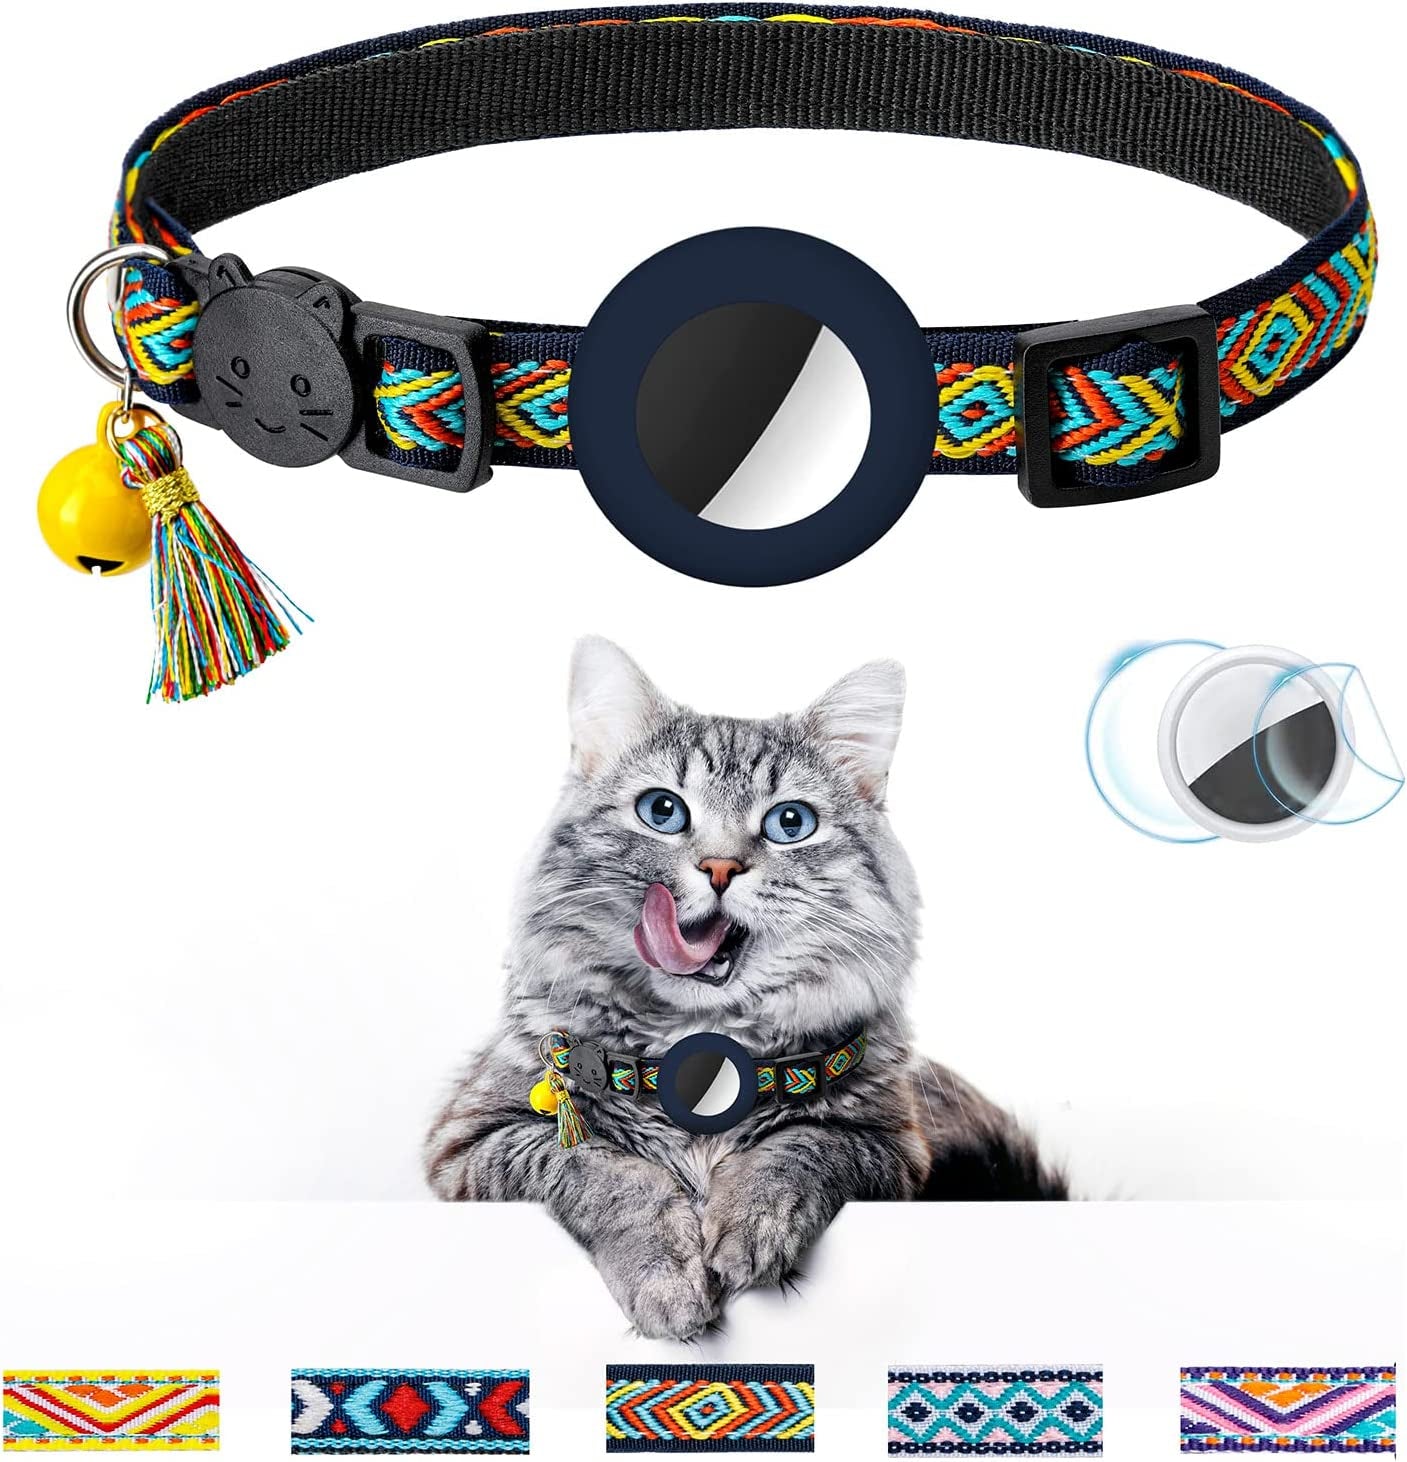 Airtag Cat Collar with Bell Adjustable Breakaway Kitten Collars:- Safety Buckle and Silicone Air Tag Holder Case Compatible with Apple Airtag Geometric Pattern Pet Collar